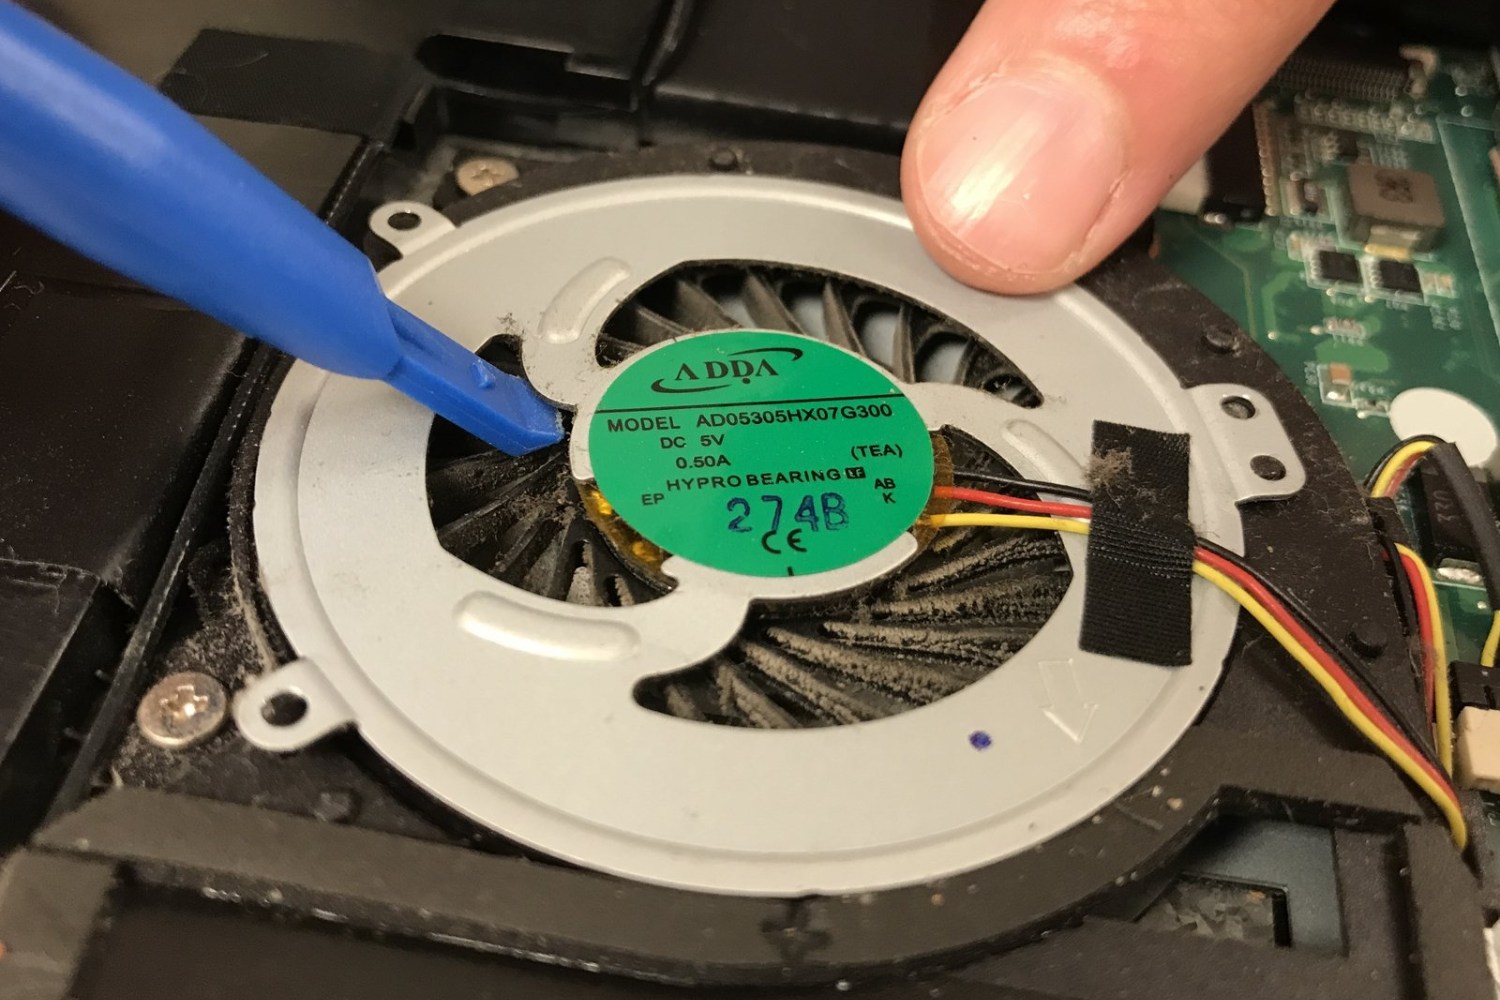 How To Clean The Fan In A Toshiba U840W Series Ultrabook